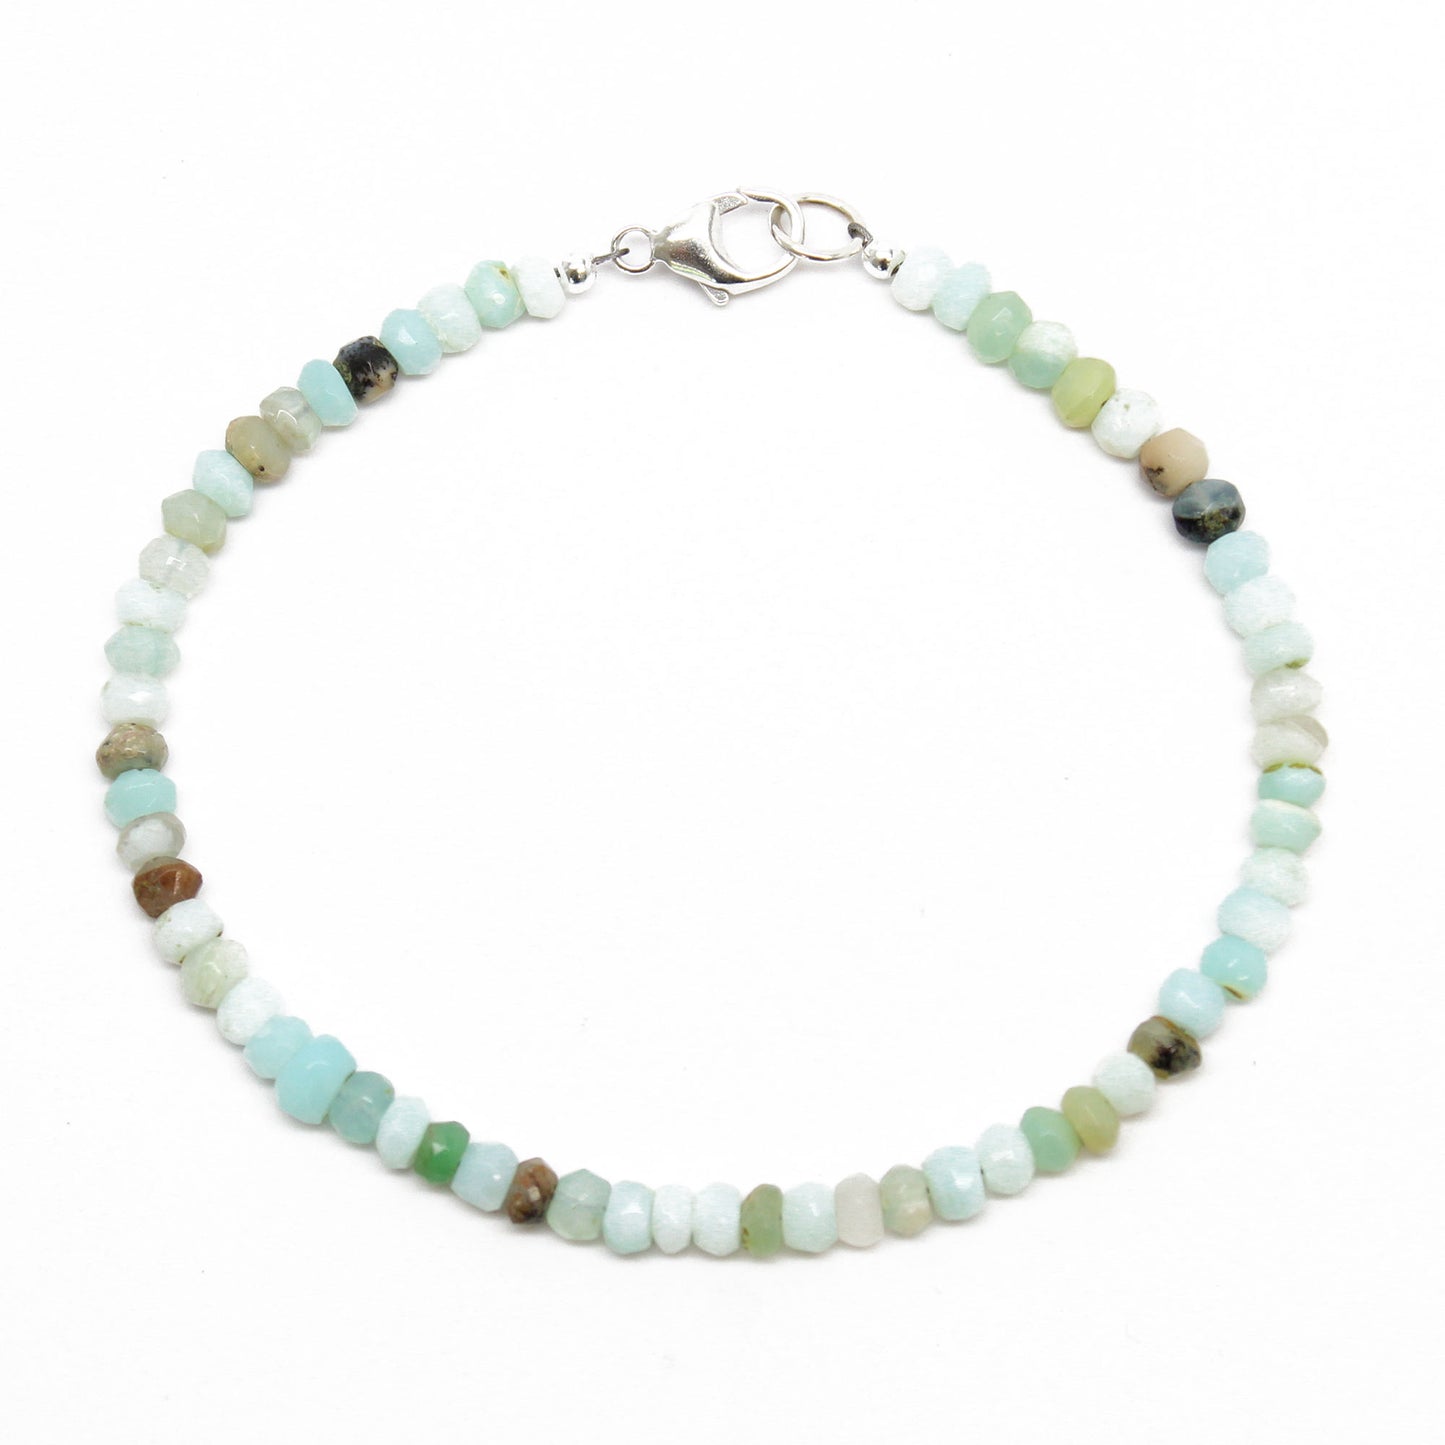 Tiny Peruvian Opal Bracelet with Sterling Silver Clasp